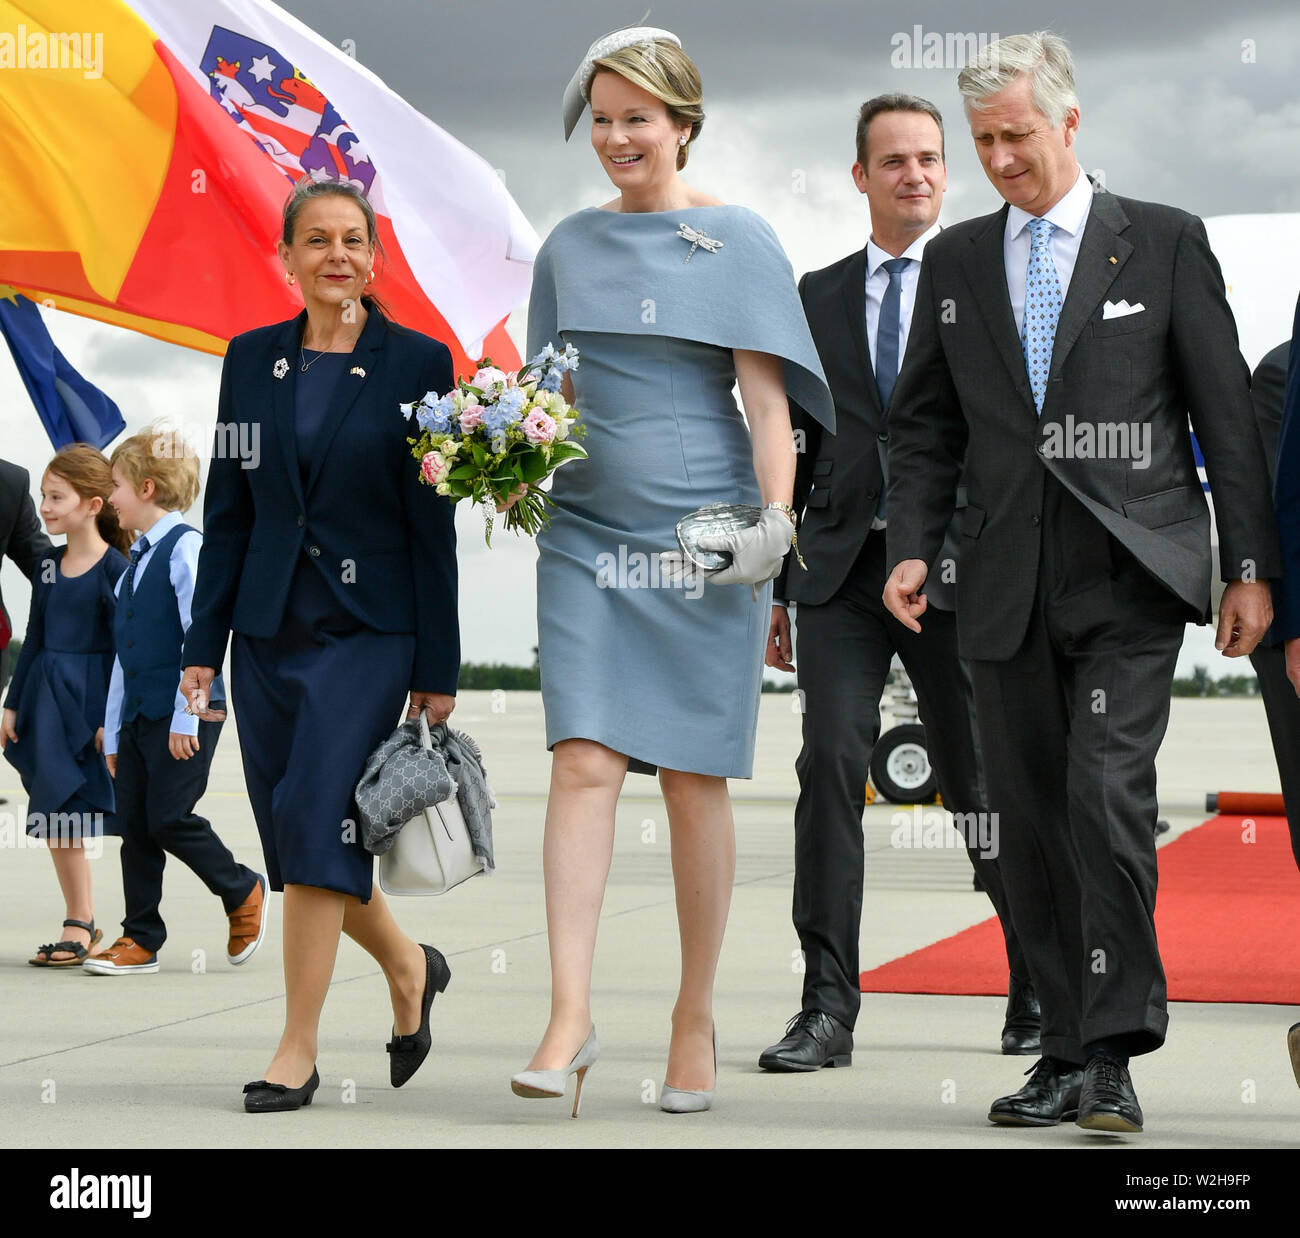 Erfurt, Germany. 09th July, 2019. The Belgian royal couple King Philippe and Queen Mathilde arrive at Erfurt-Weimar airport. Left Germana Alberti vom Hofe, wife of the Thuringian Prime Minister. The royal couple visits Thuringia and Saxony-Anhalt on a two-day journey. Credit: Jens Kalaene/dpa-Zentralbild/dpa/Alamy Live News Stock Photo